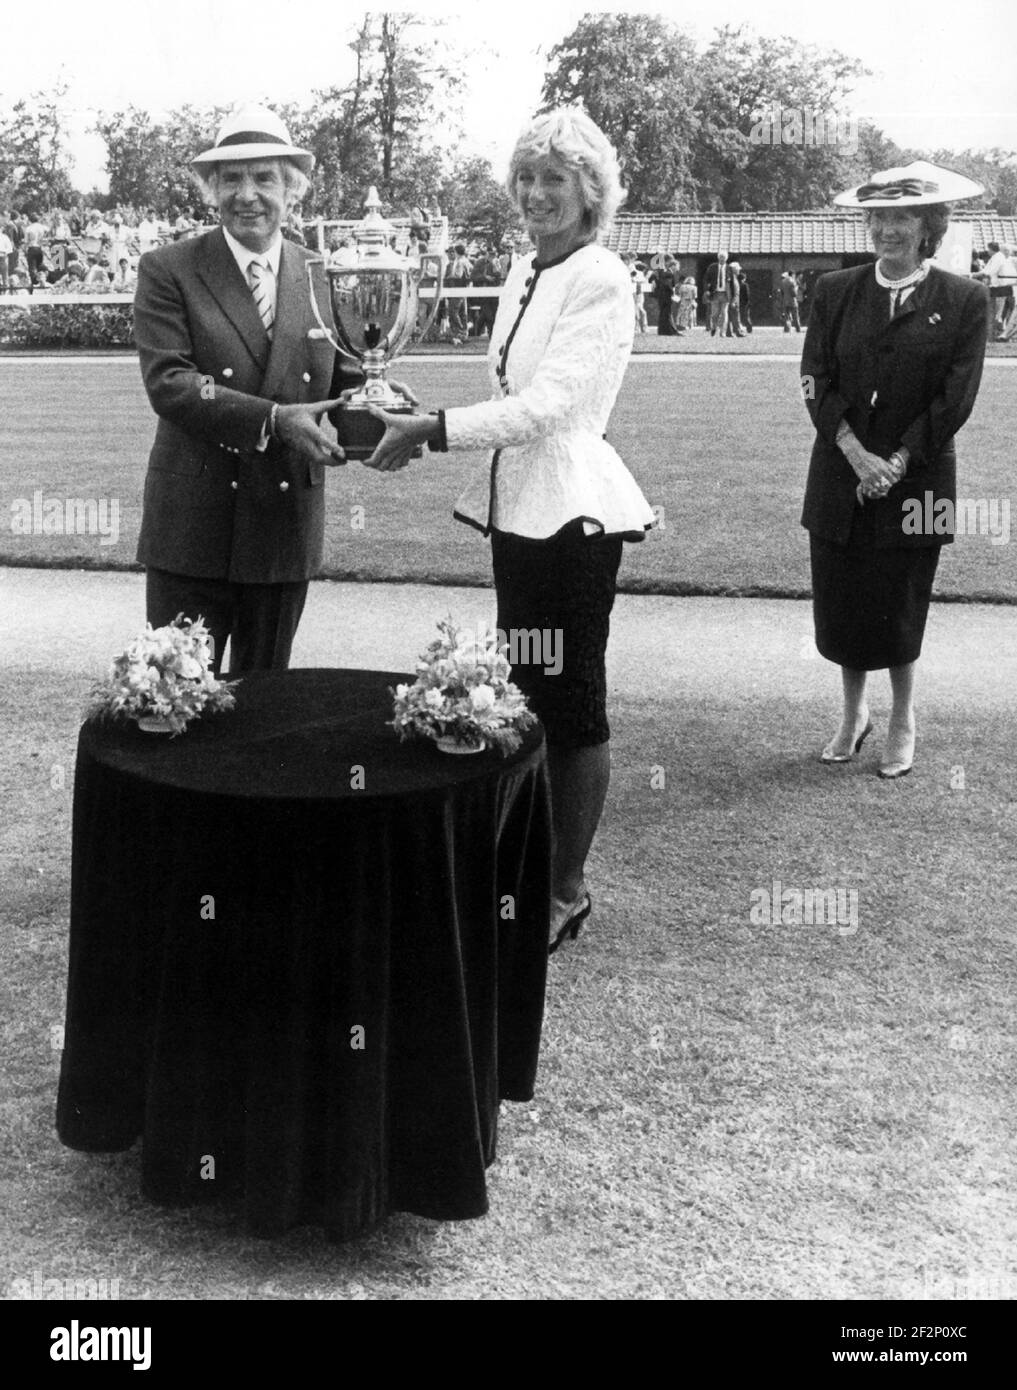 SIR ERNEST HARRISON CHIEF EXECUTIVE OF RACAL ELECTRONICS PRESENTS THE NASSAU STAKES TROPHY TO JOAN LEAK REPRESENTING NON DE PLUMES OWNER SHEIKH MOHAMMED AT GOODWOOD. PIC MIKE WALKER, 2003 Stock Photo